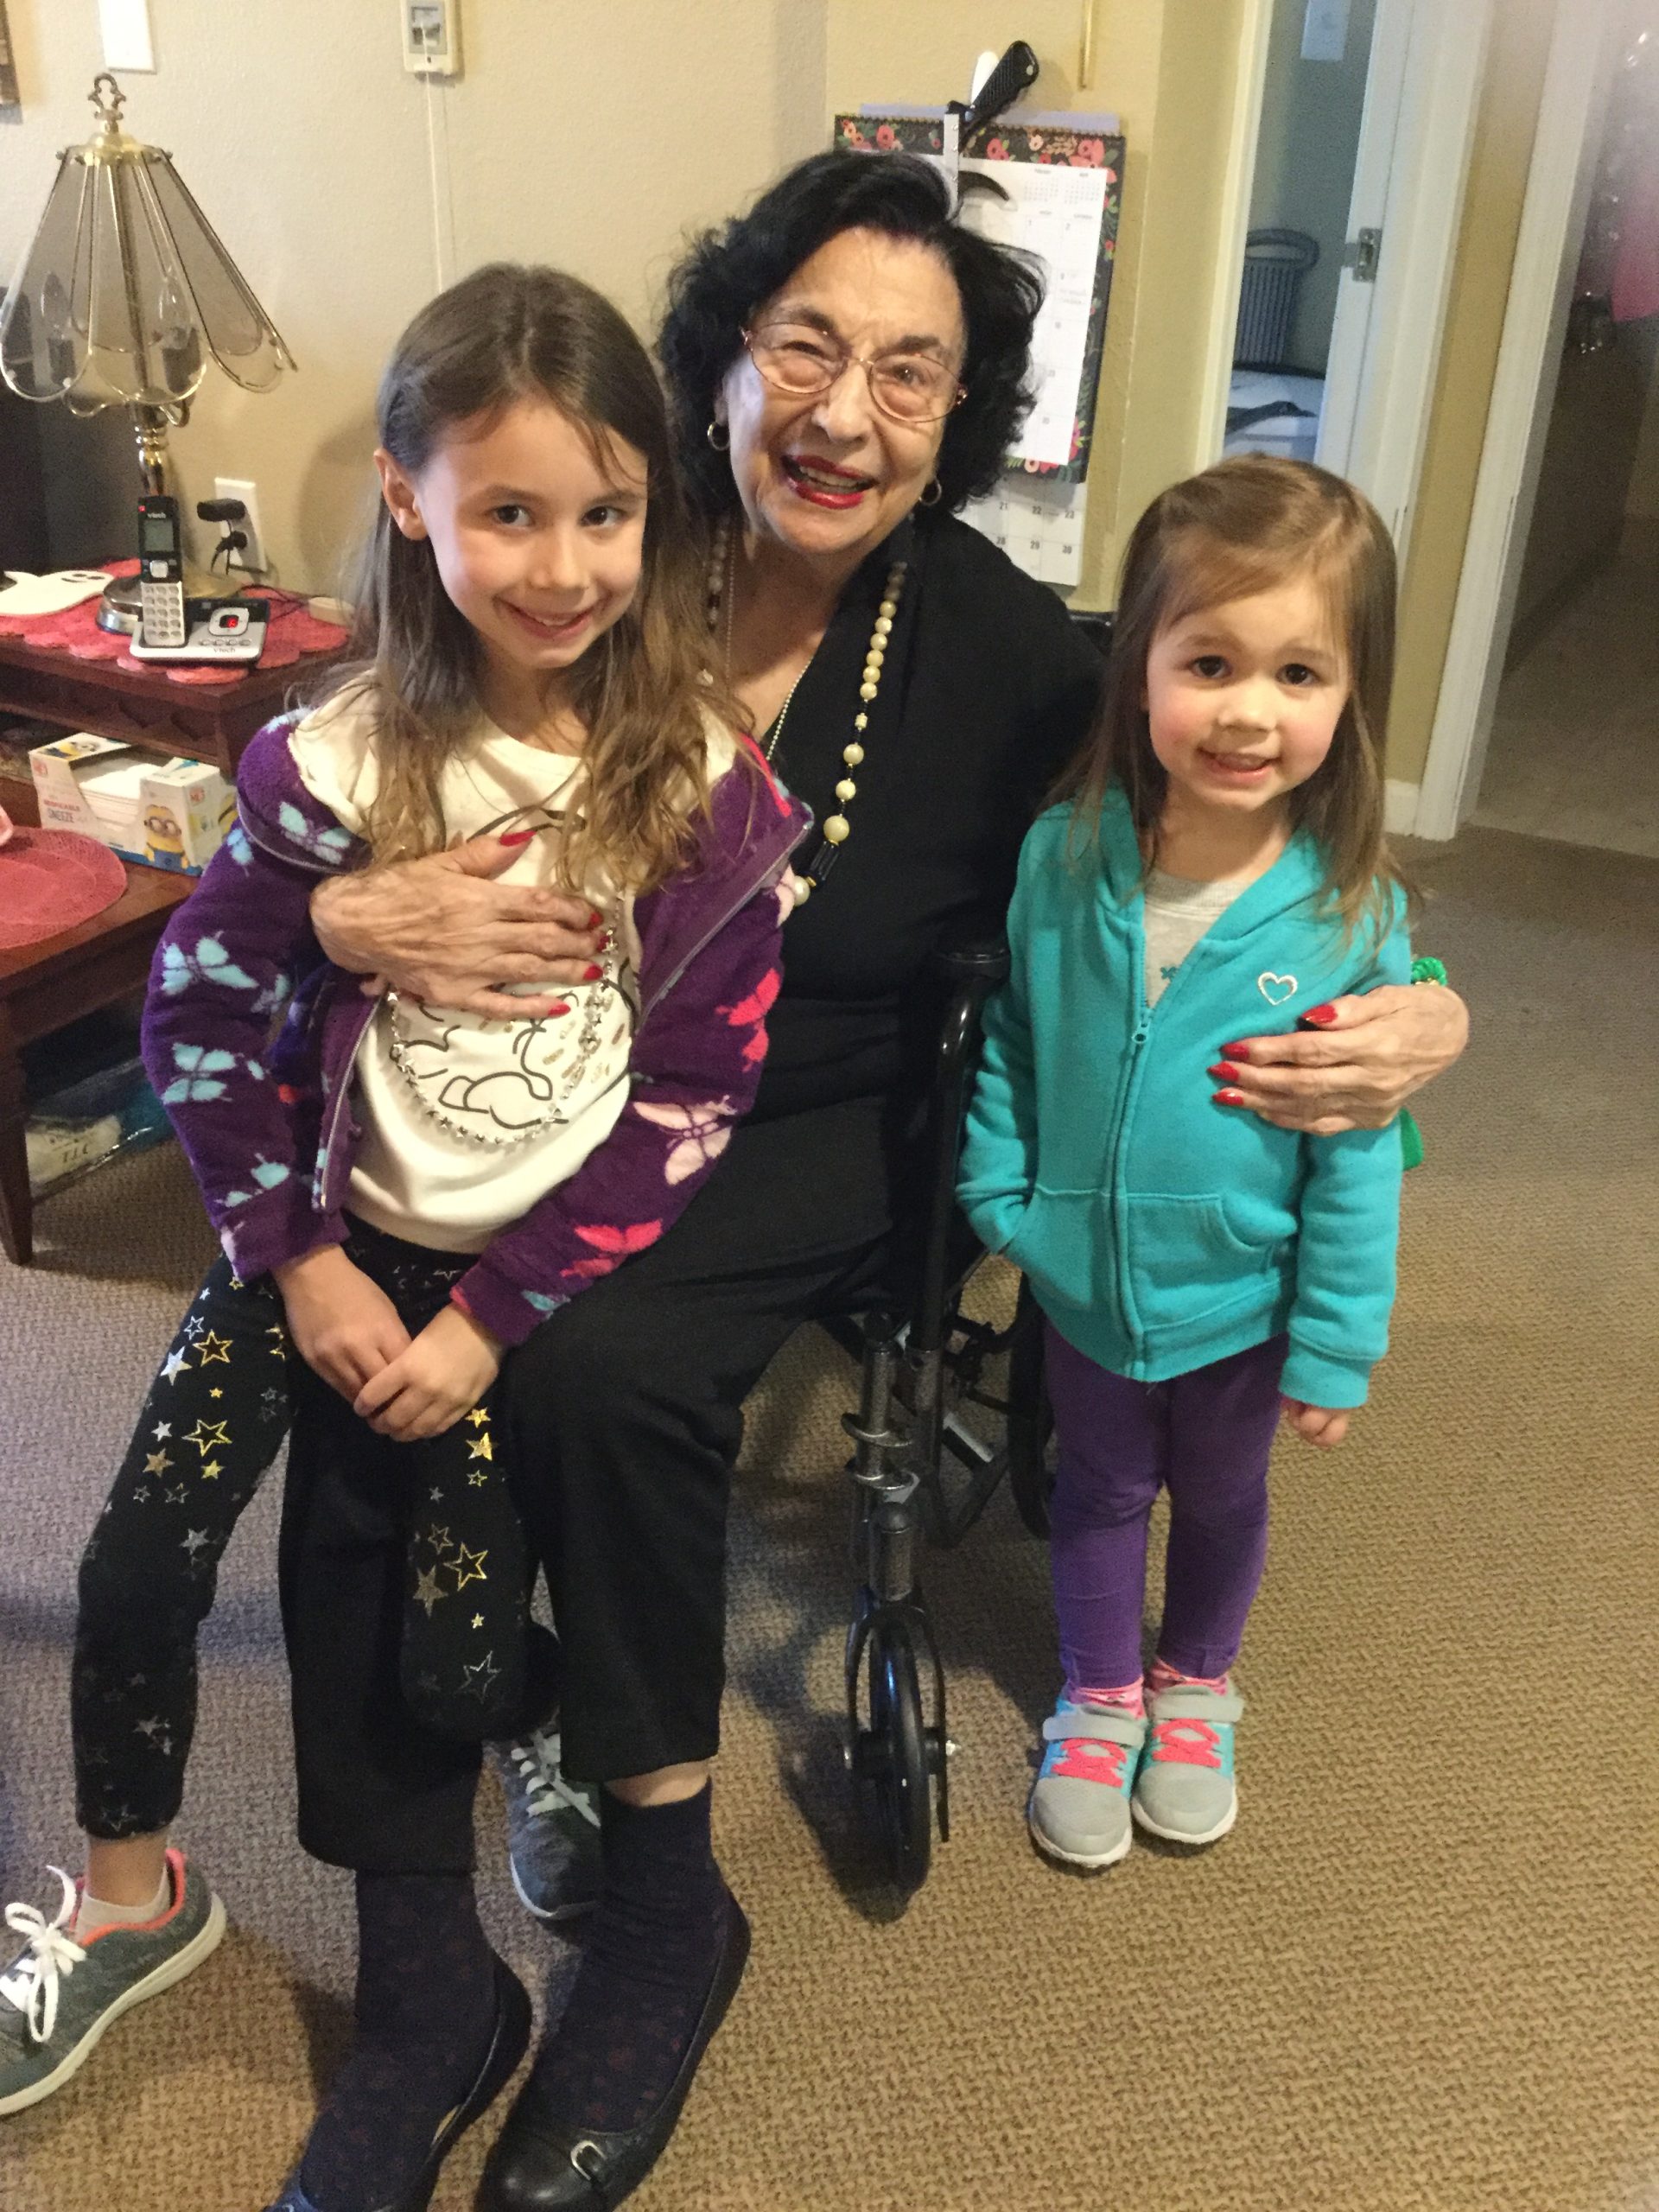 Nonna with girls